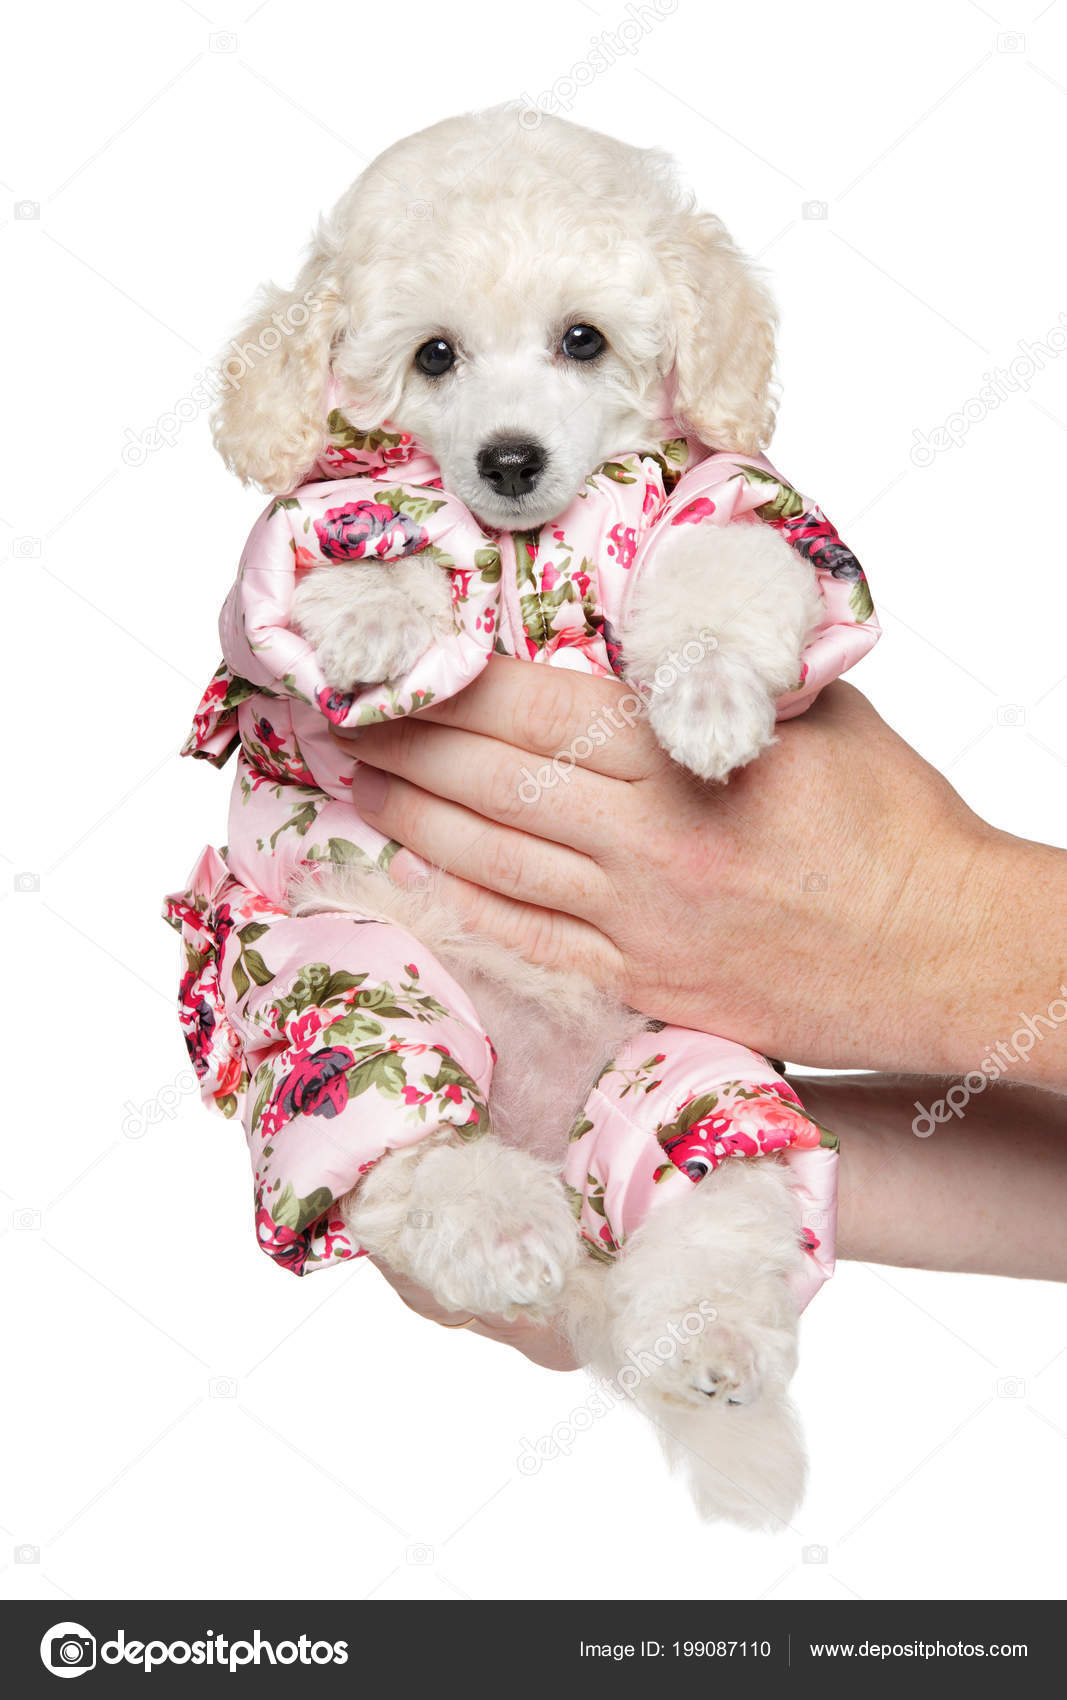 white poodle puppy